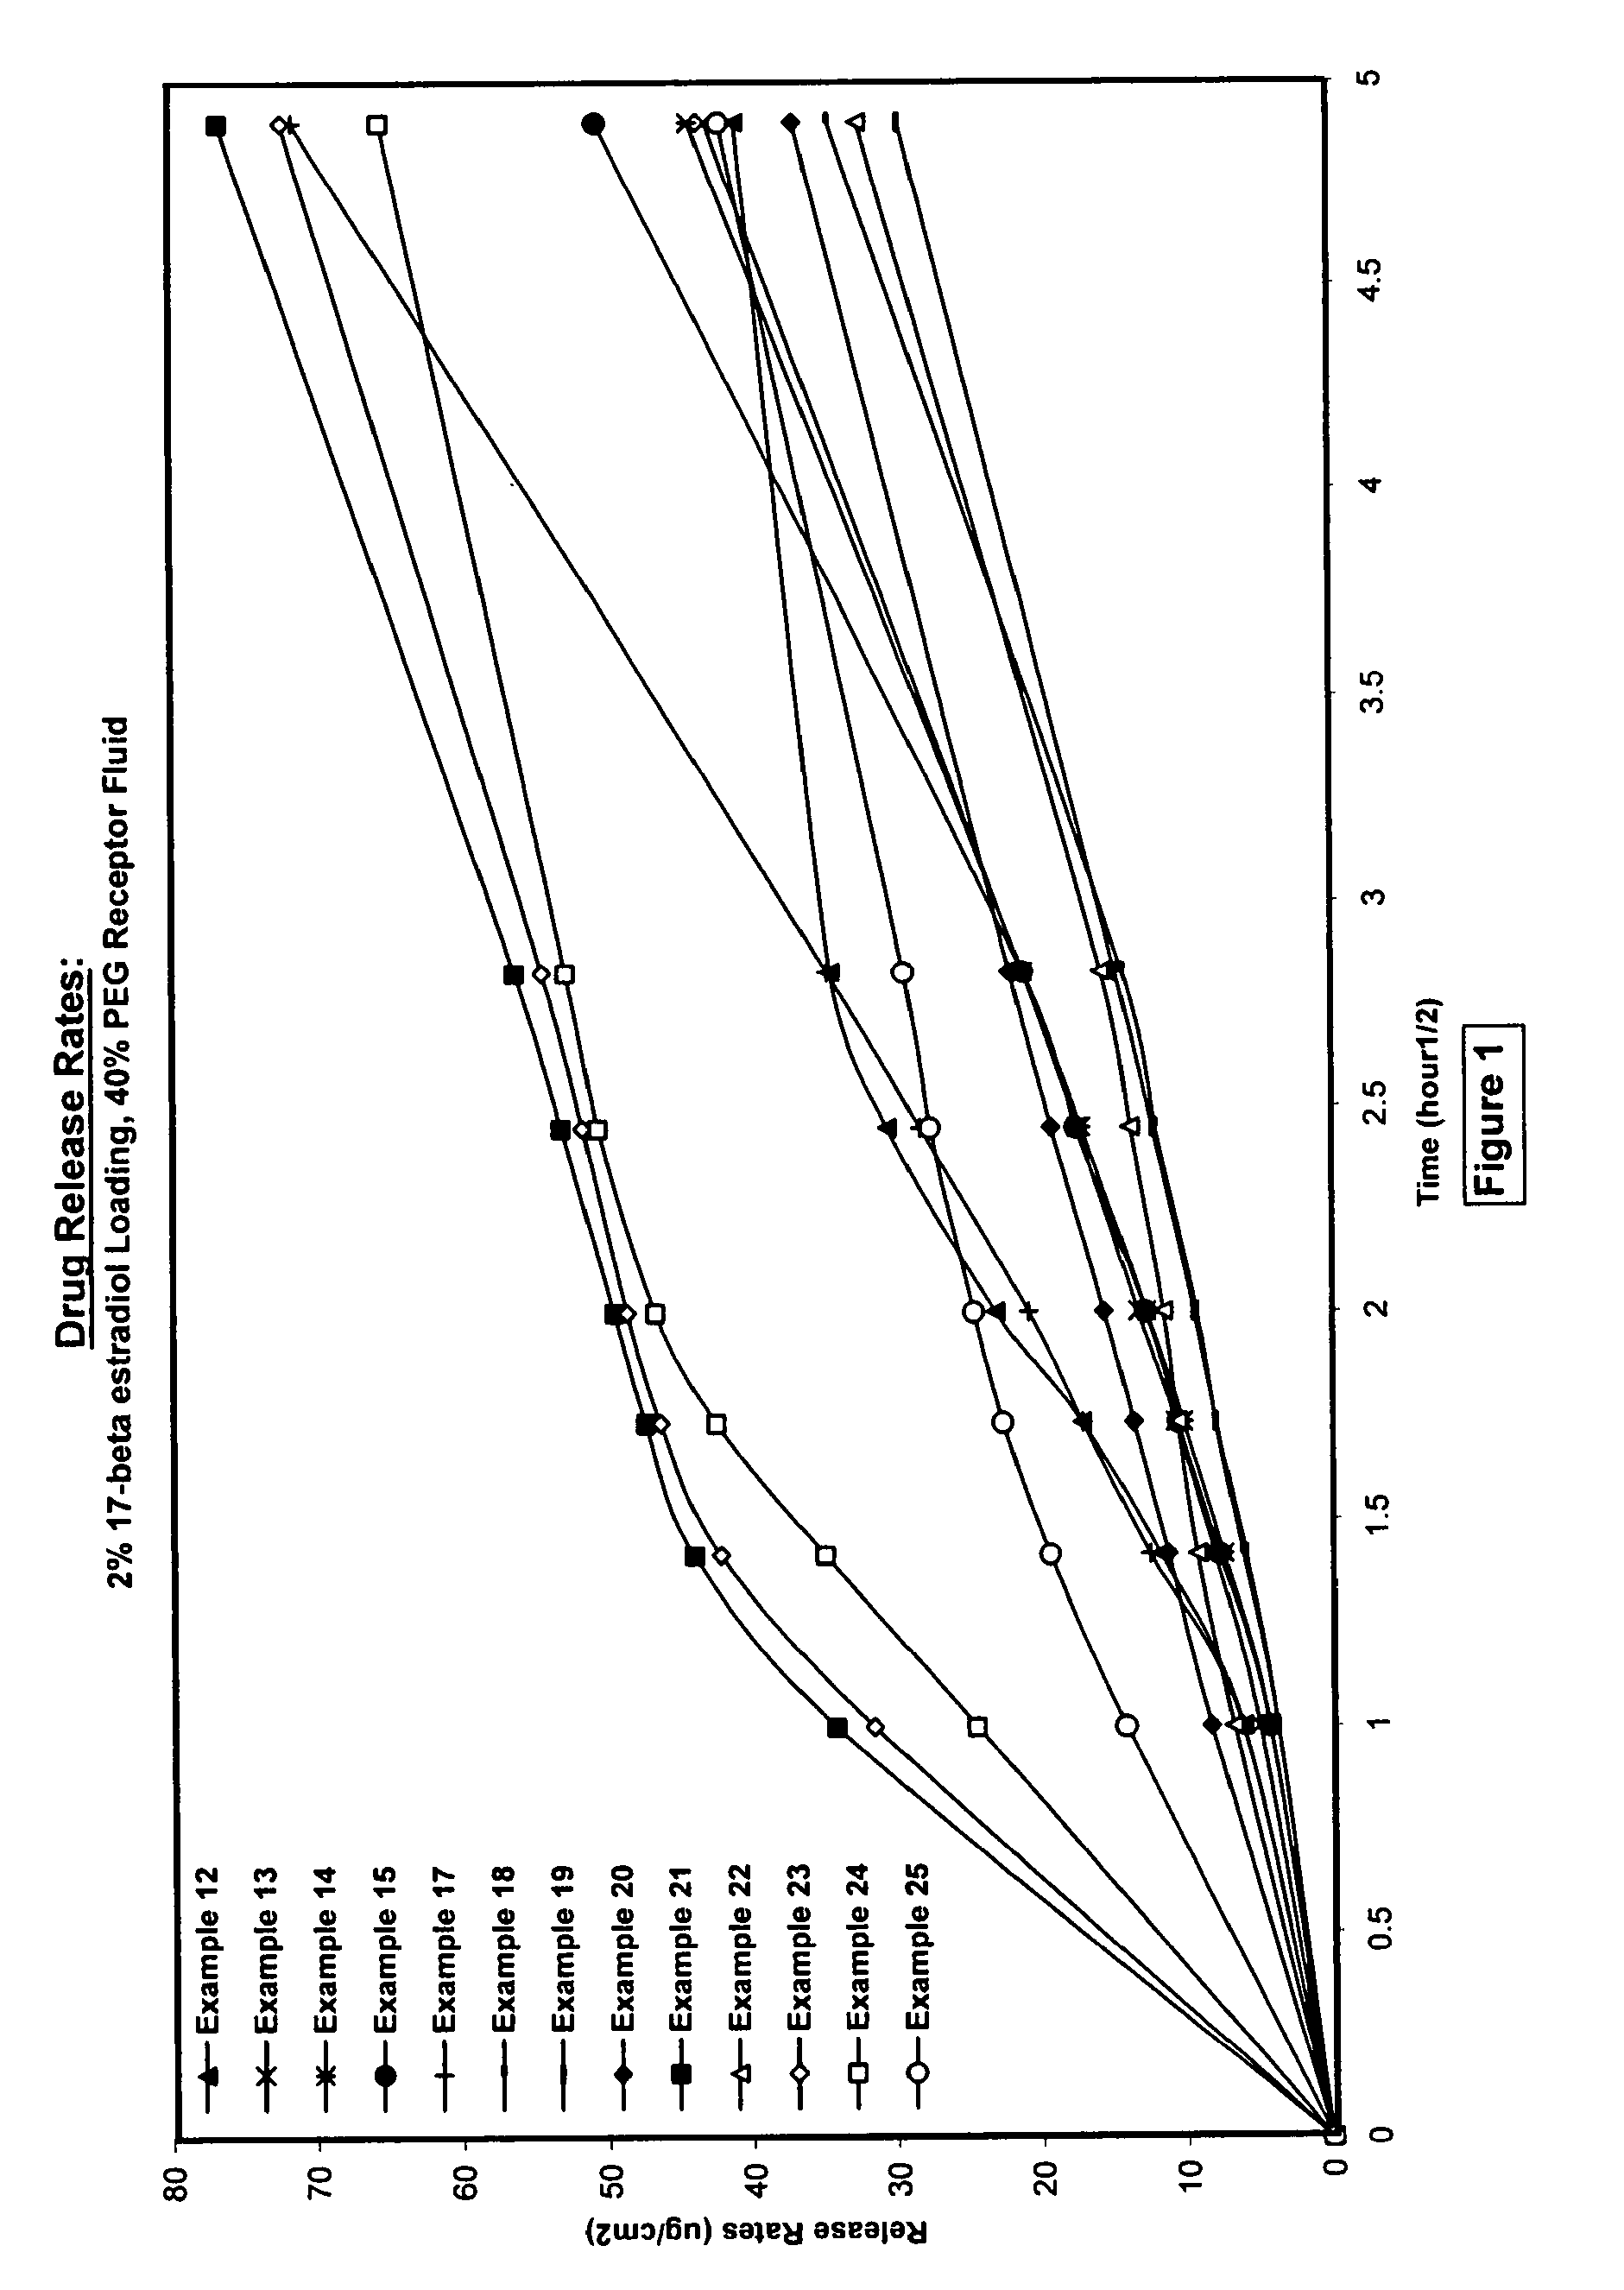 Silicone acrylate hybride composition and method of making same